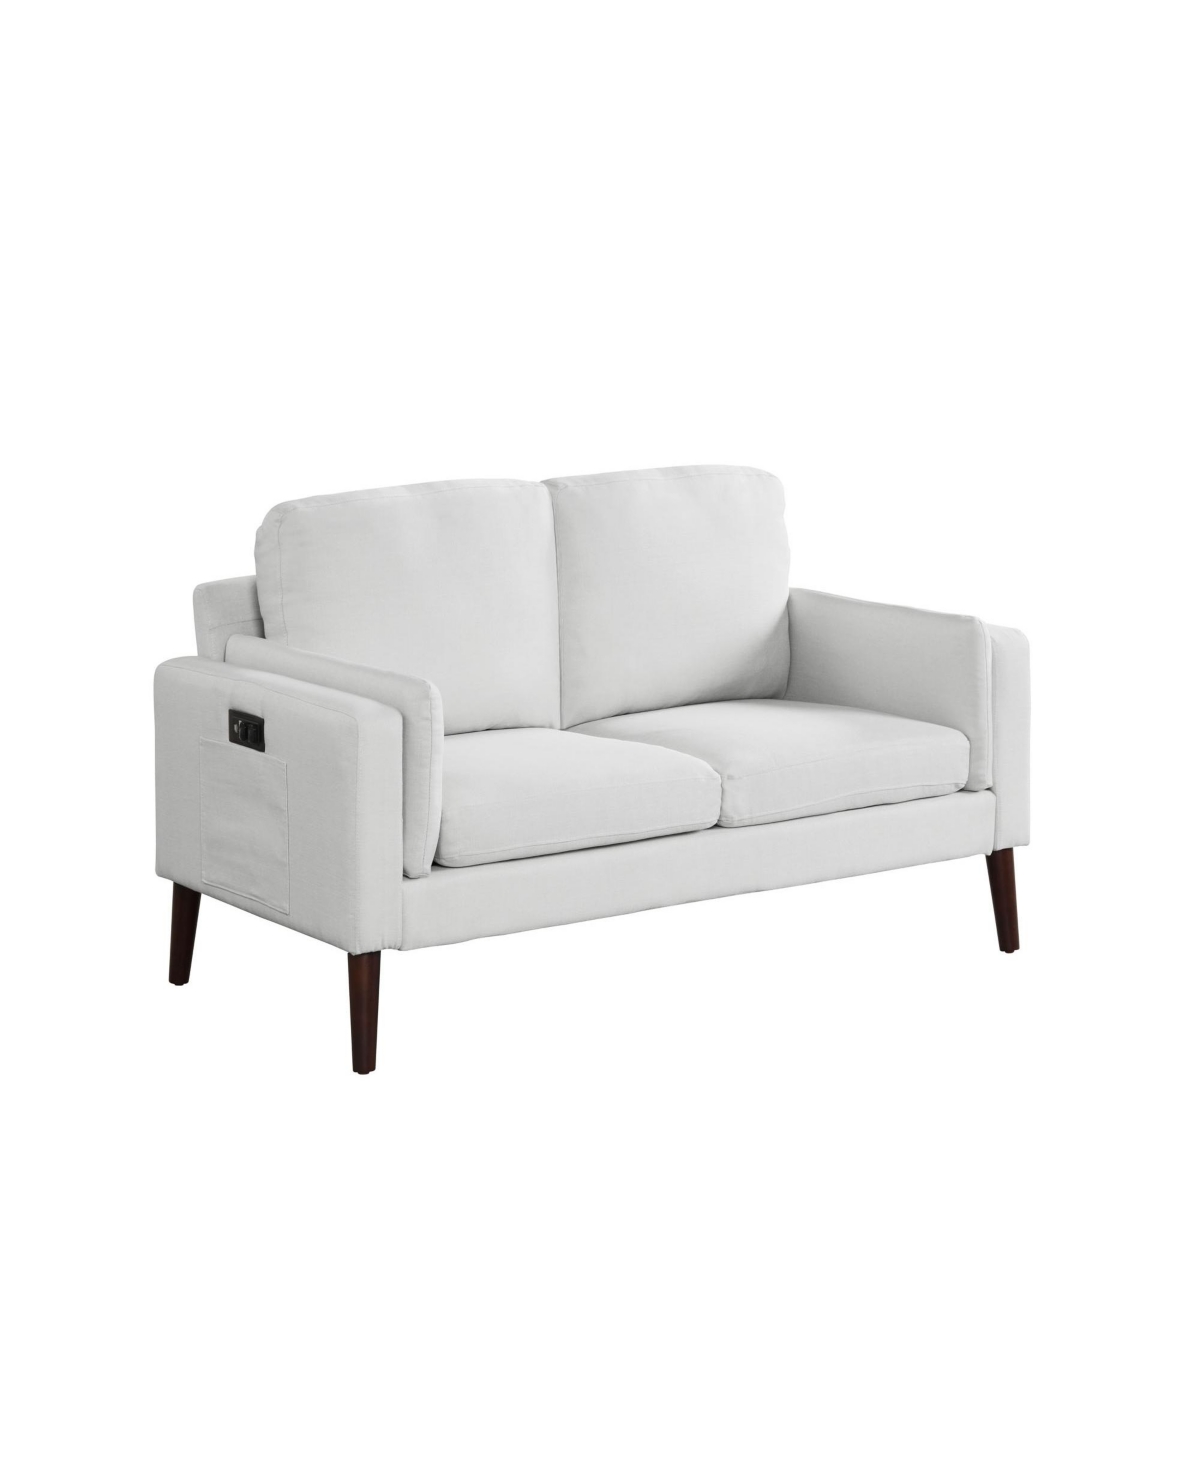 Lifestyle Solutions 35" Wood, Steel, Foam And Polyester Nate With Power And Usb Ports Loveseat In Light Gray